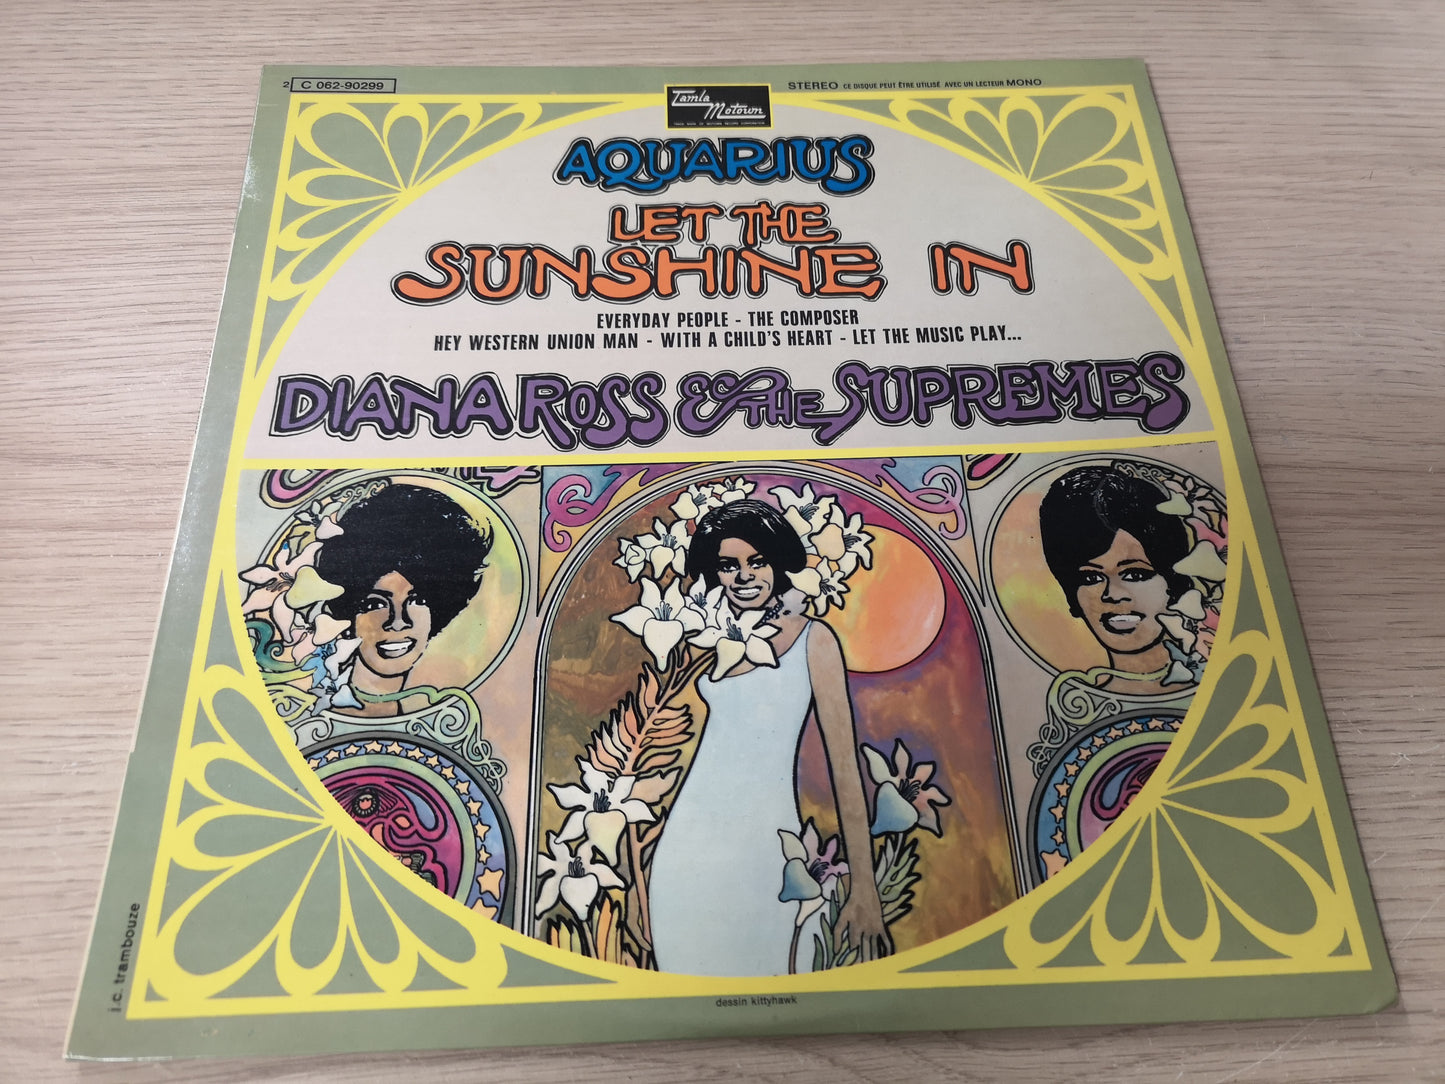 Diana Ross & The Supremes "Let The Sunshine in" Orig France 1969 M-/EX